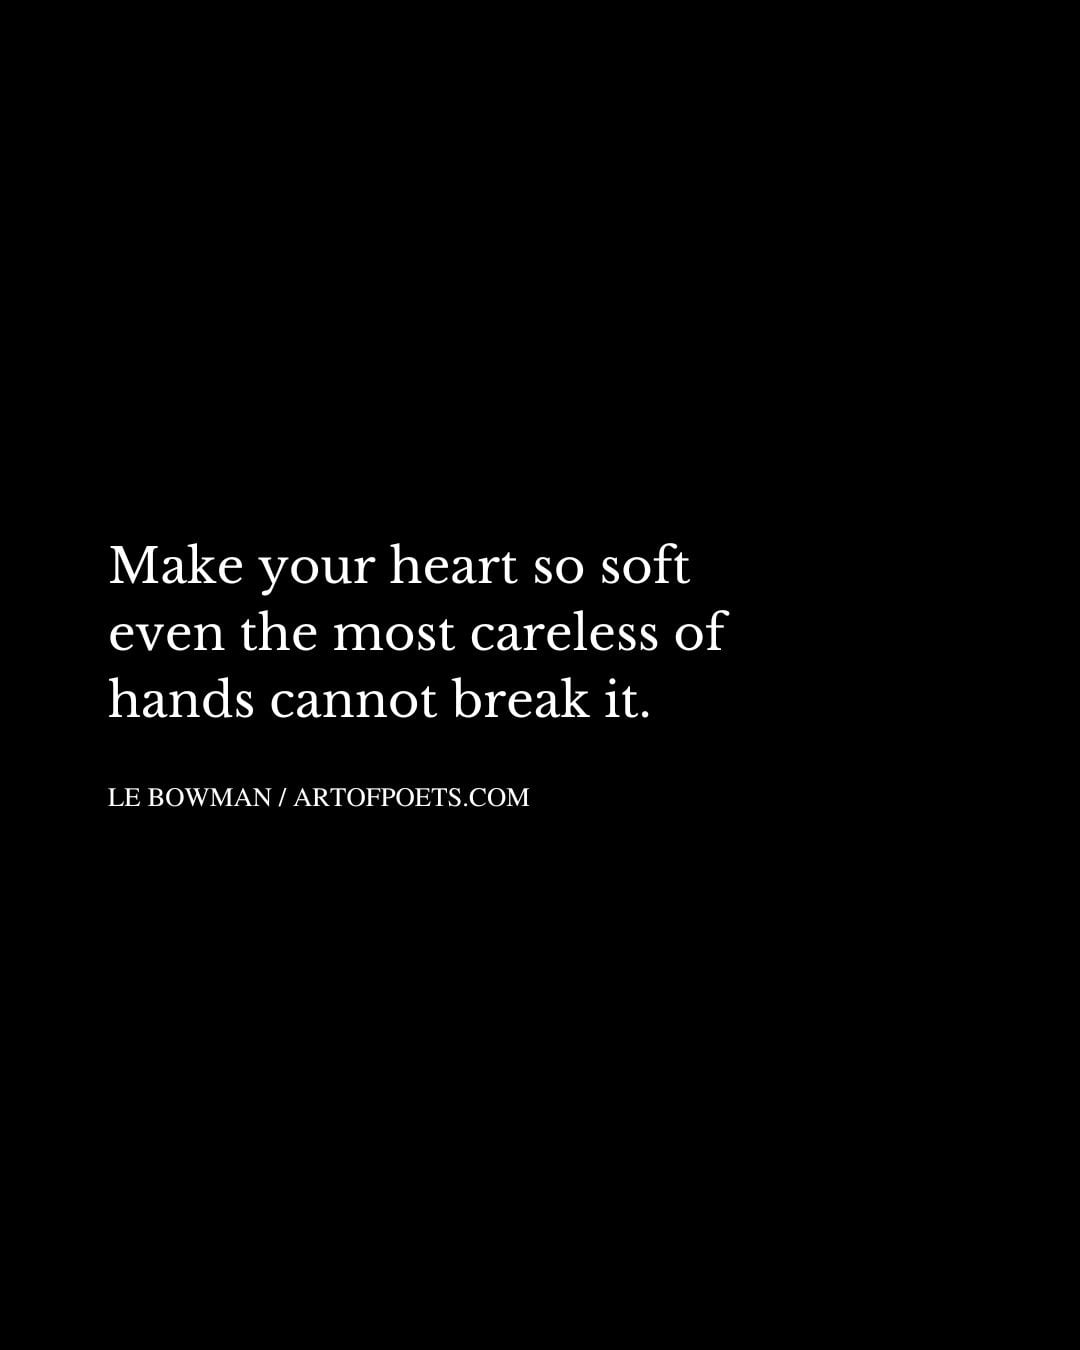 Make your heart so soft even the most careless of hands cannot break it